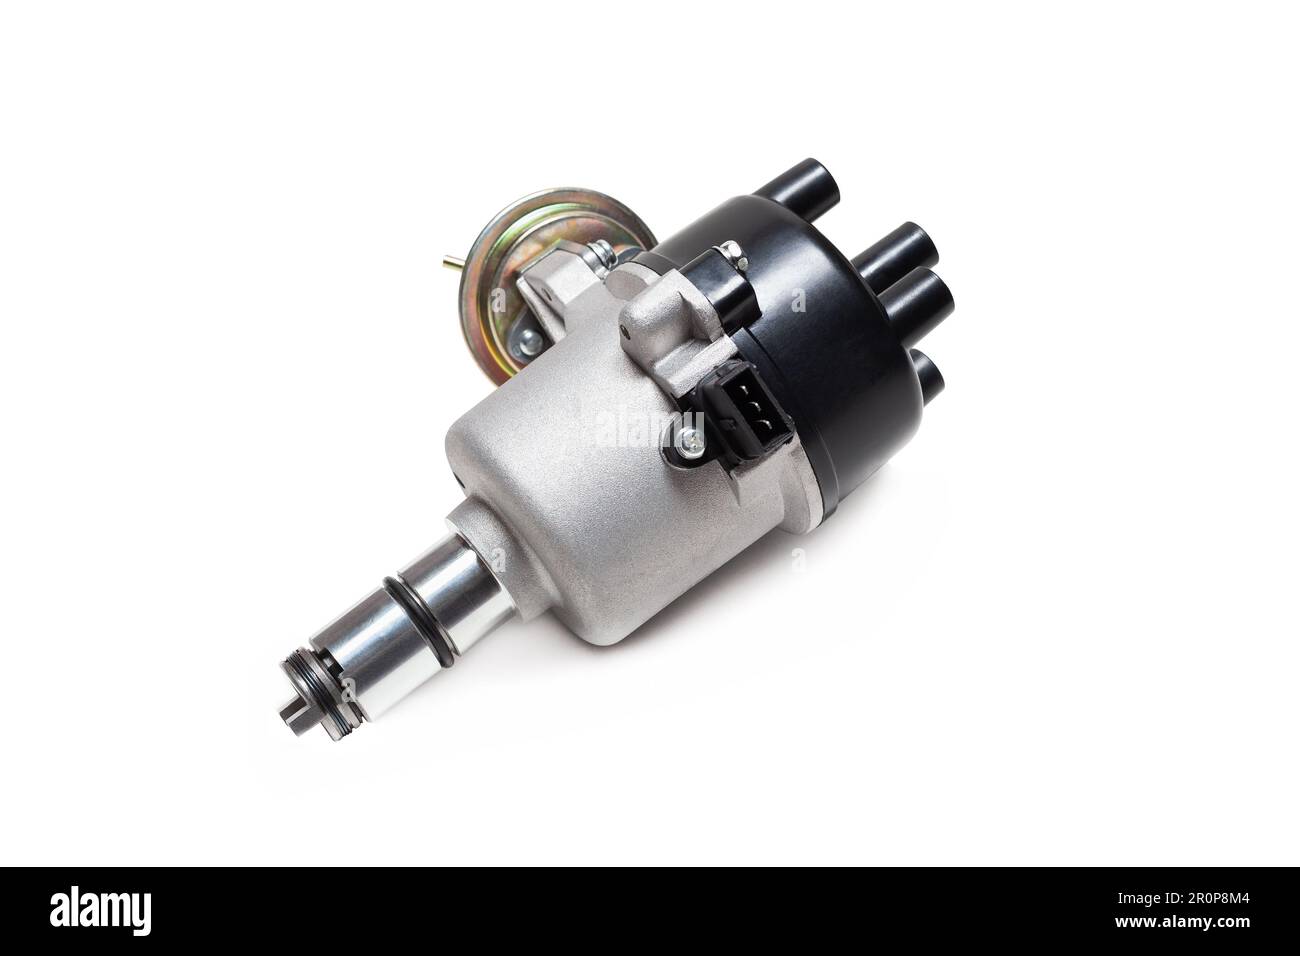 https://c8.alamy.com/comp/2R0P8M4/ignition-system-distributor-isolated-on-a-white-background-2R0P8M4.jpg